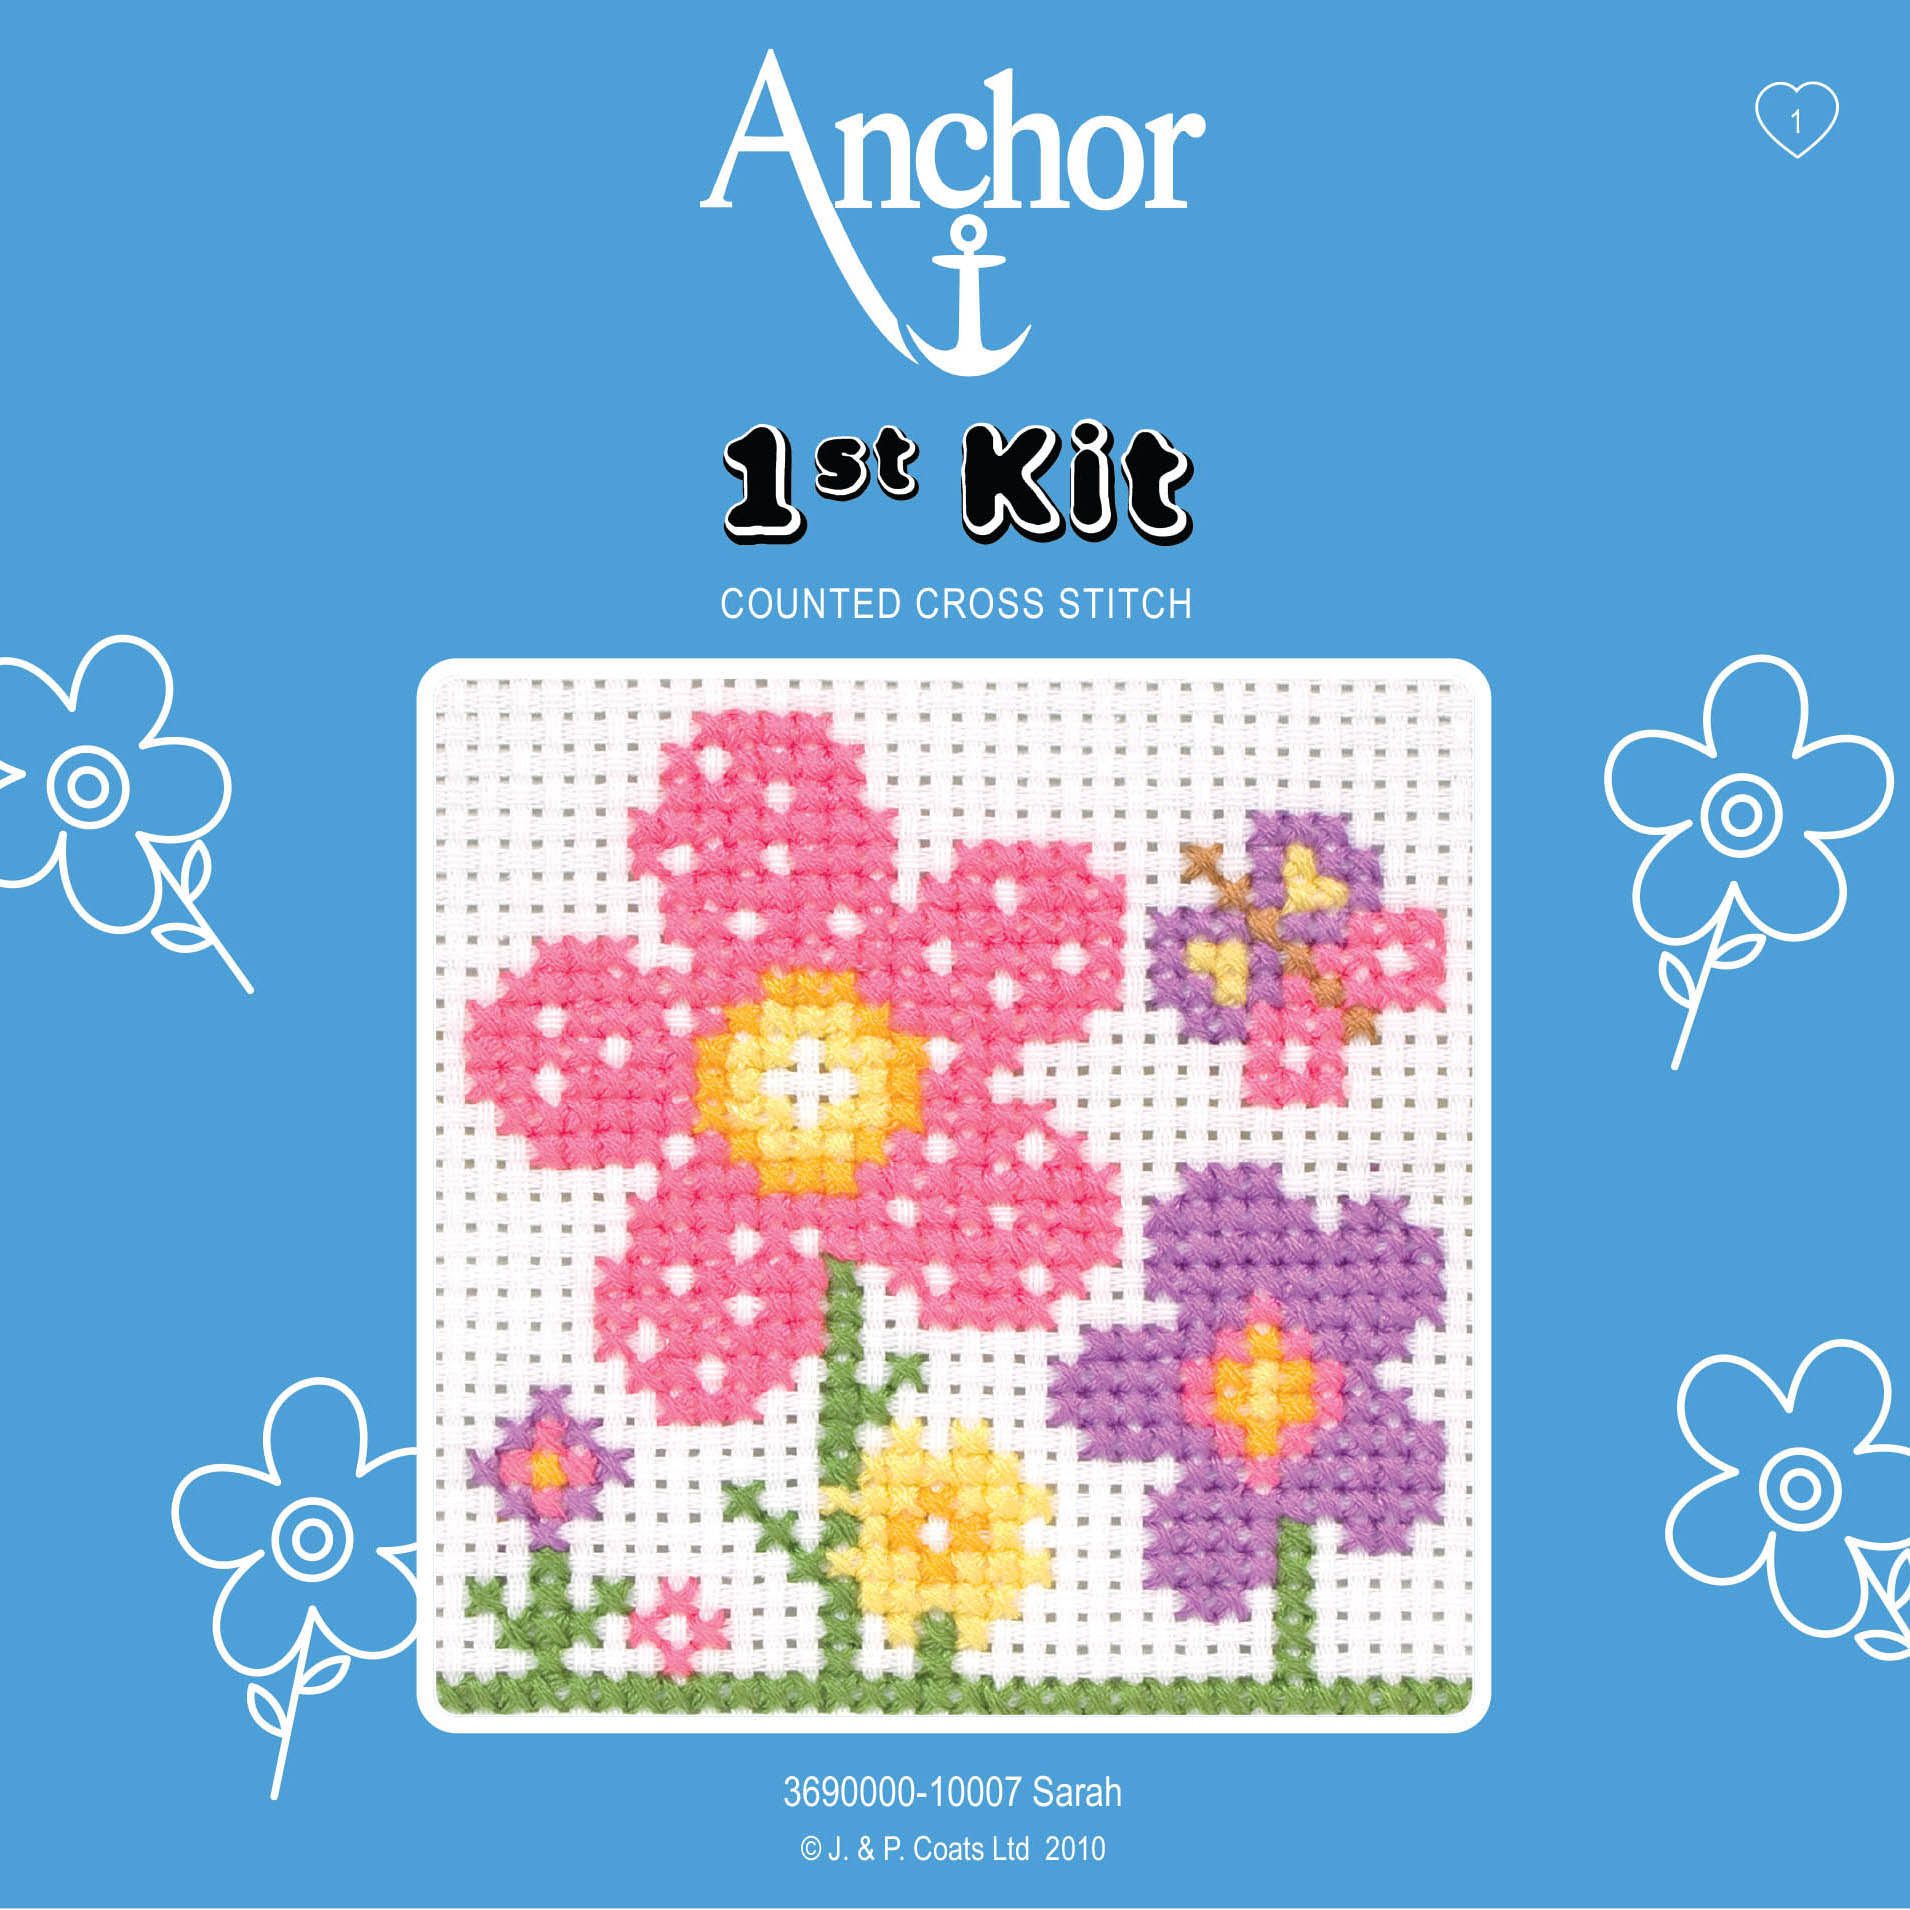 Anchor 1st Counted Cross Stitch Kit – Flowers product image